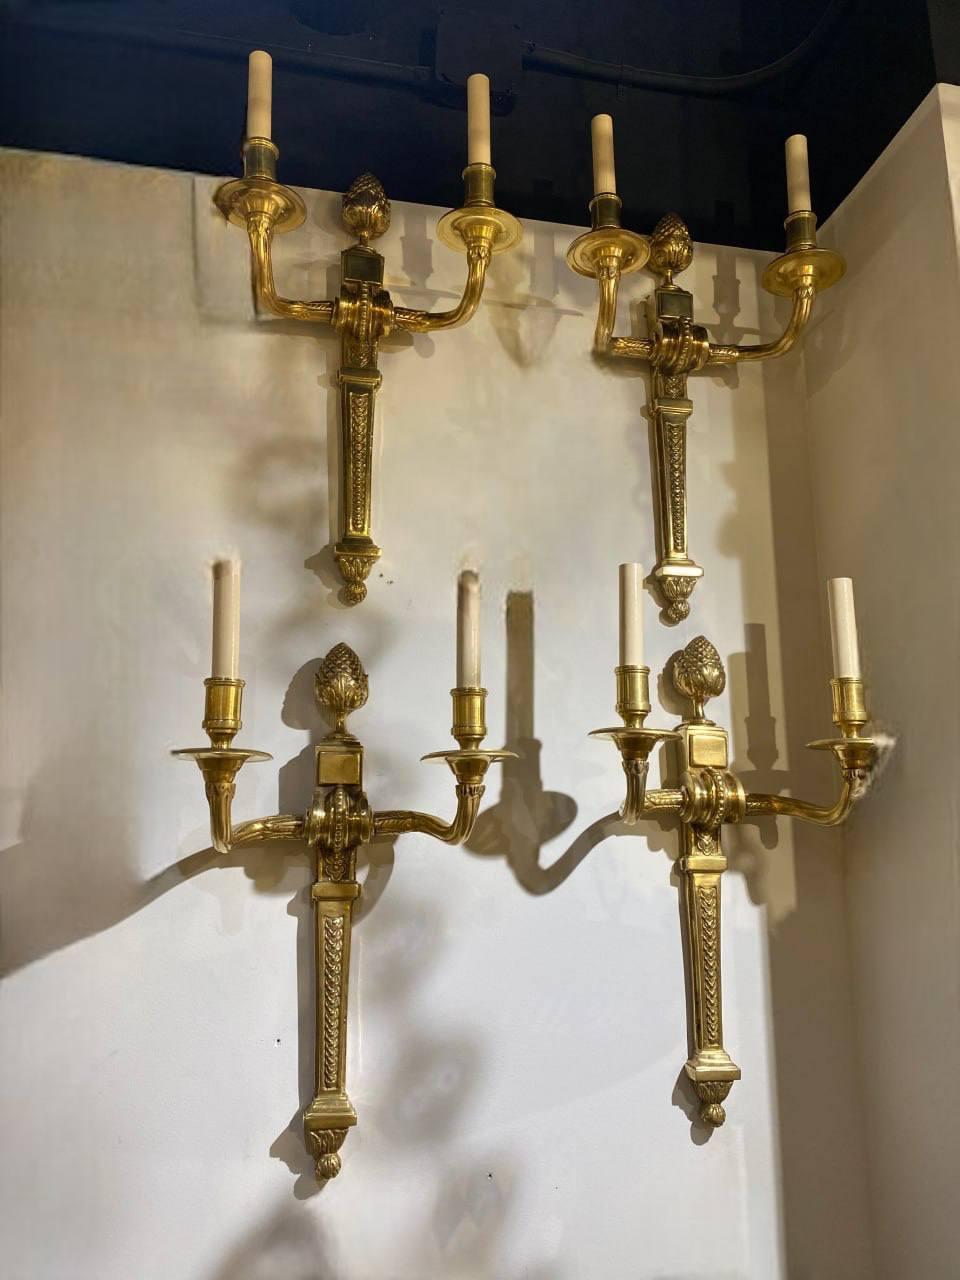 A pair of 1930’s French gilt bronze double lights sconces, original finish and patina, unusual large sized.